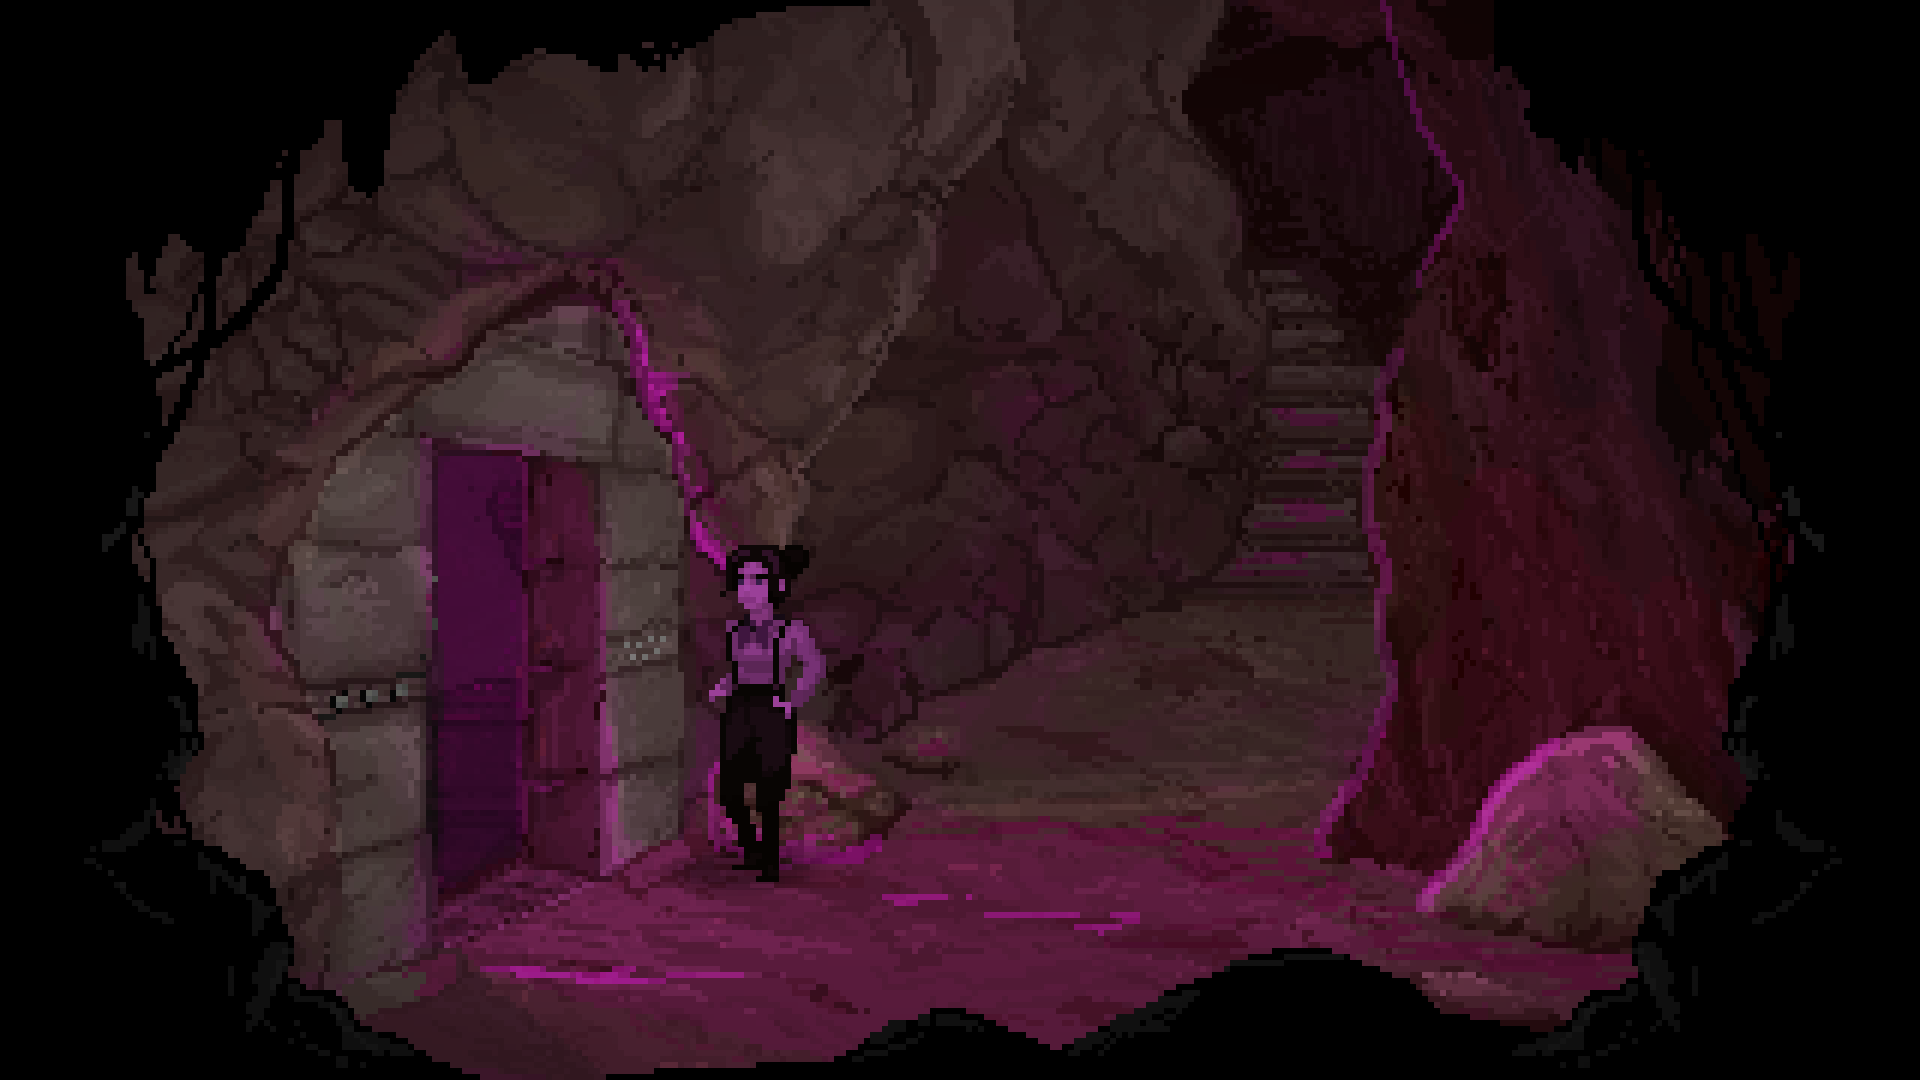 A woman with a purple light enters the cave through an open door in the excavation of Hobbs Barrow.